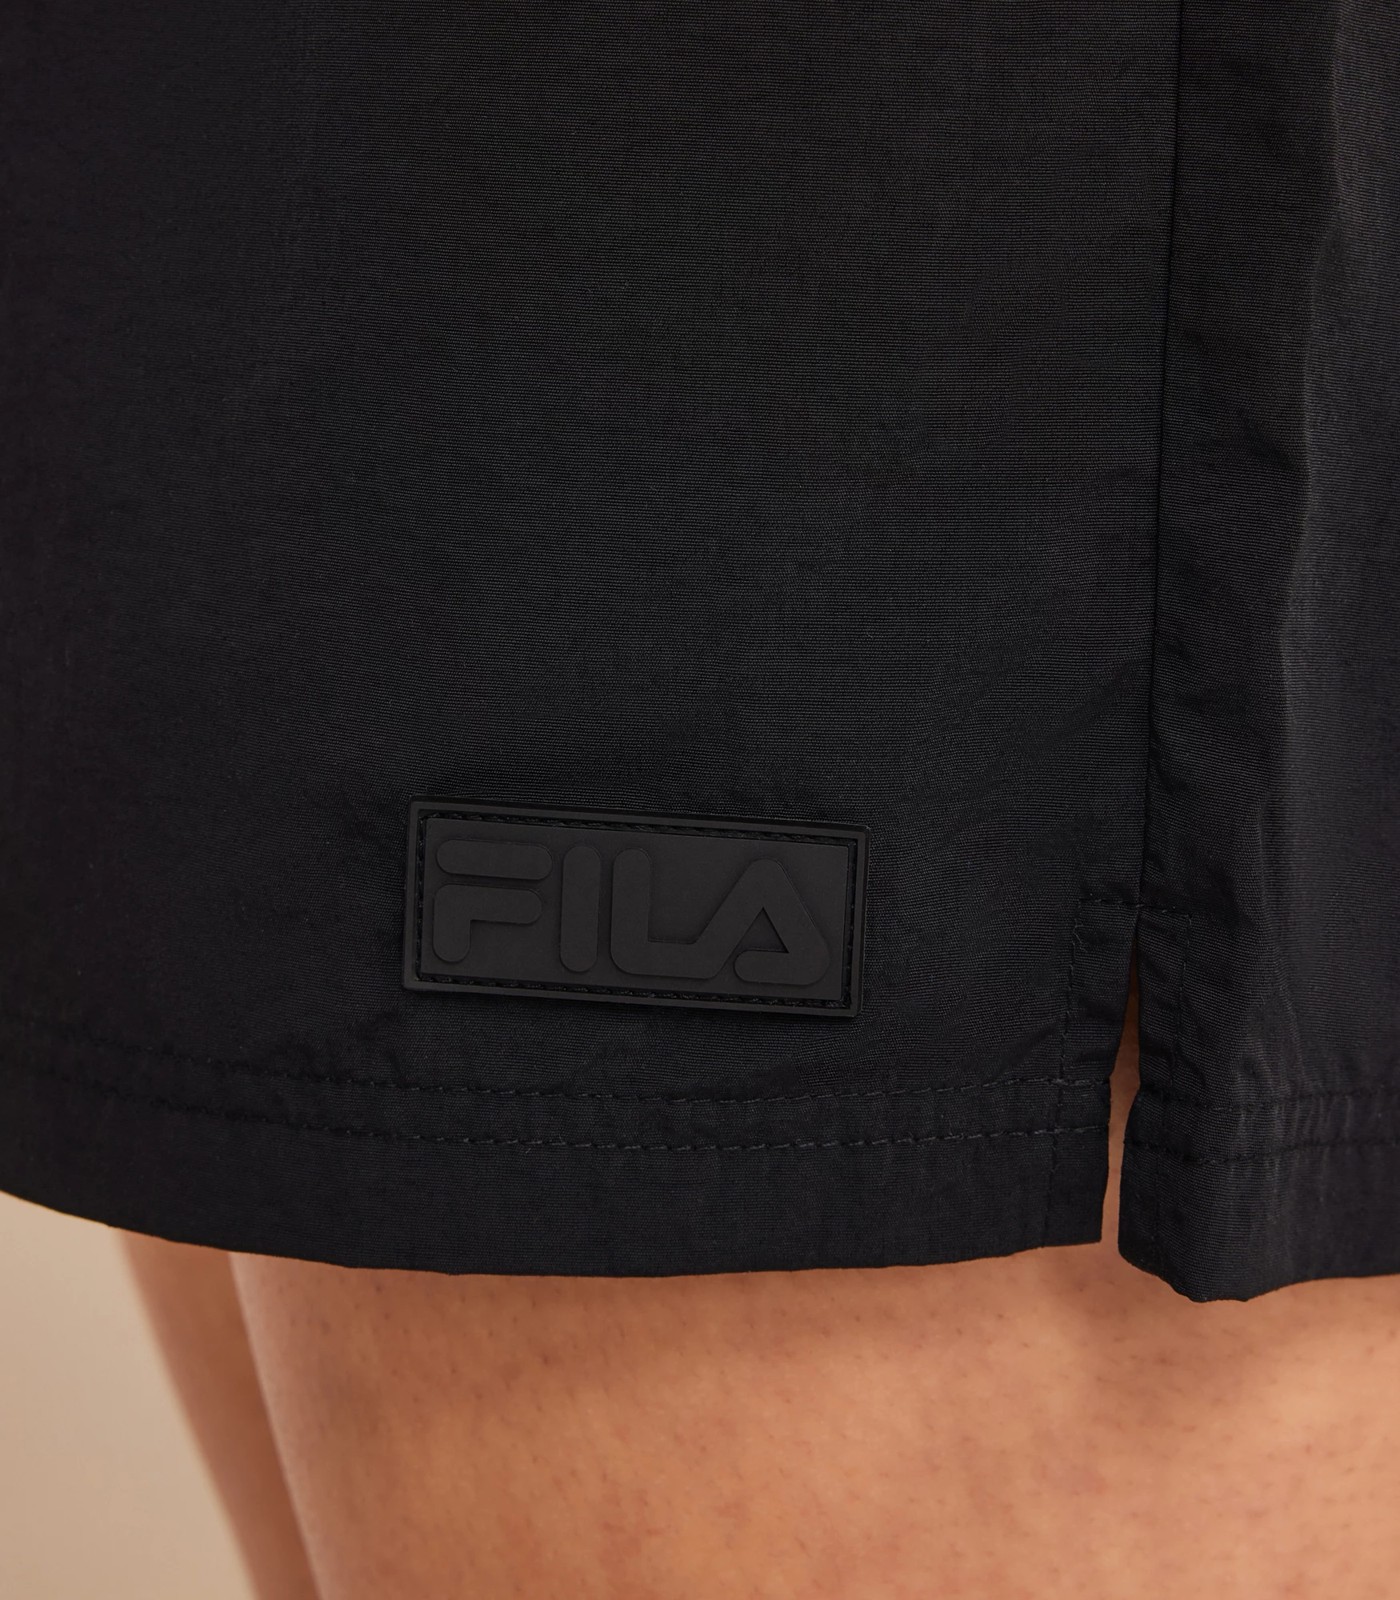 FILA mini workout shorts Black - $5 - From Kylie